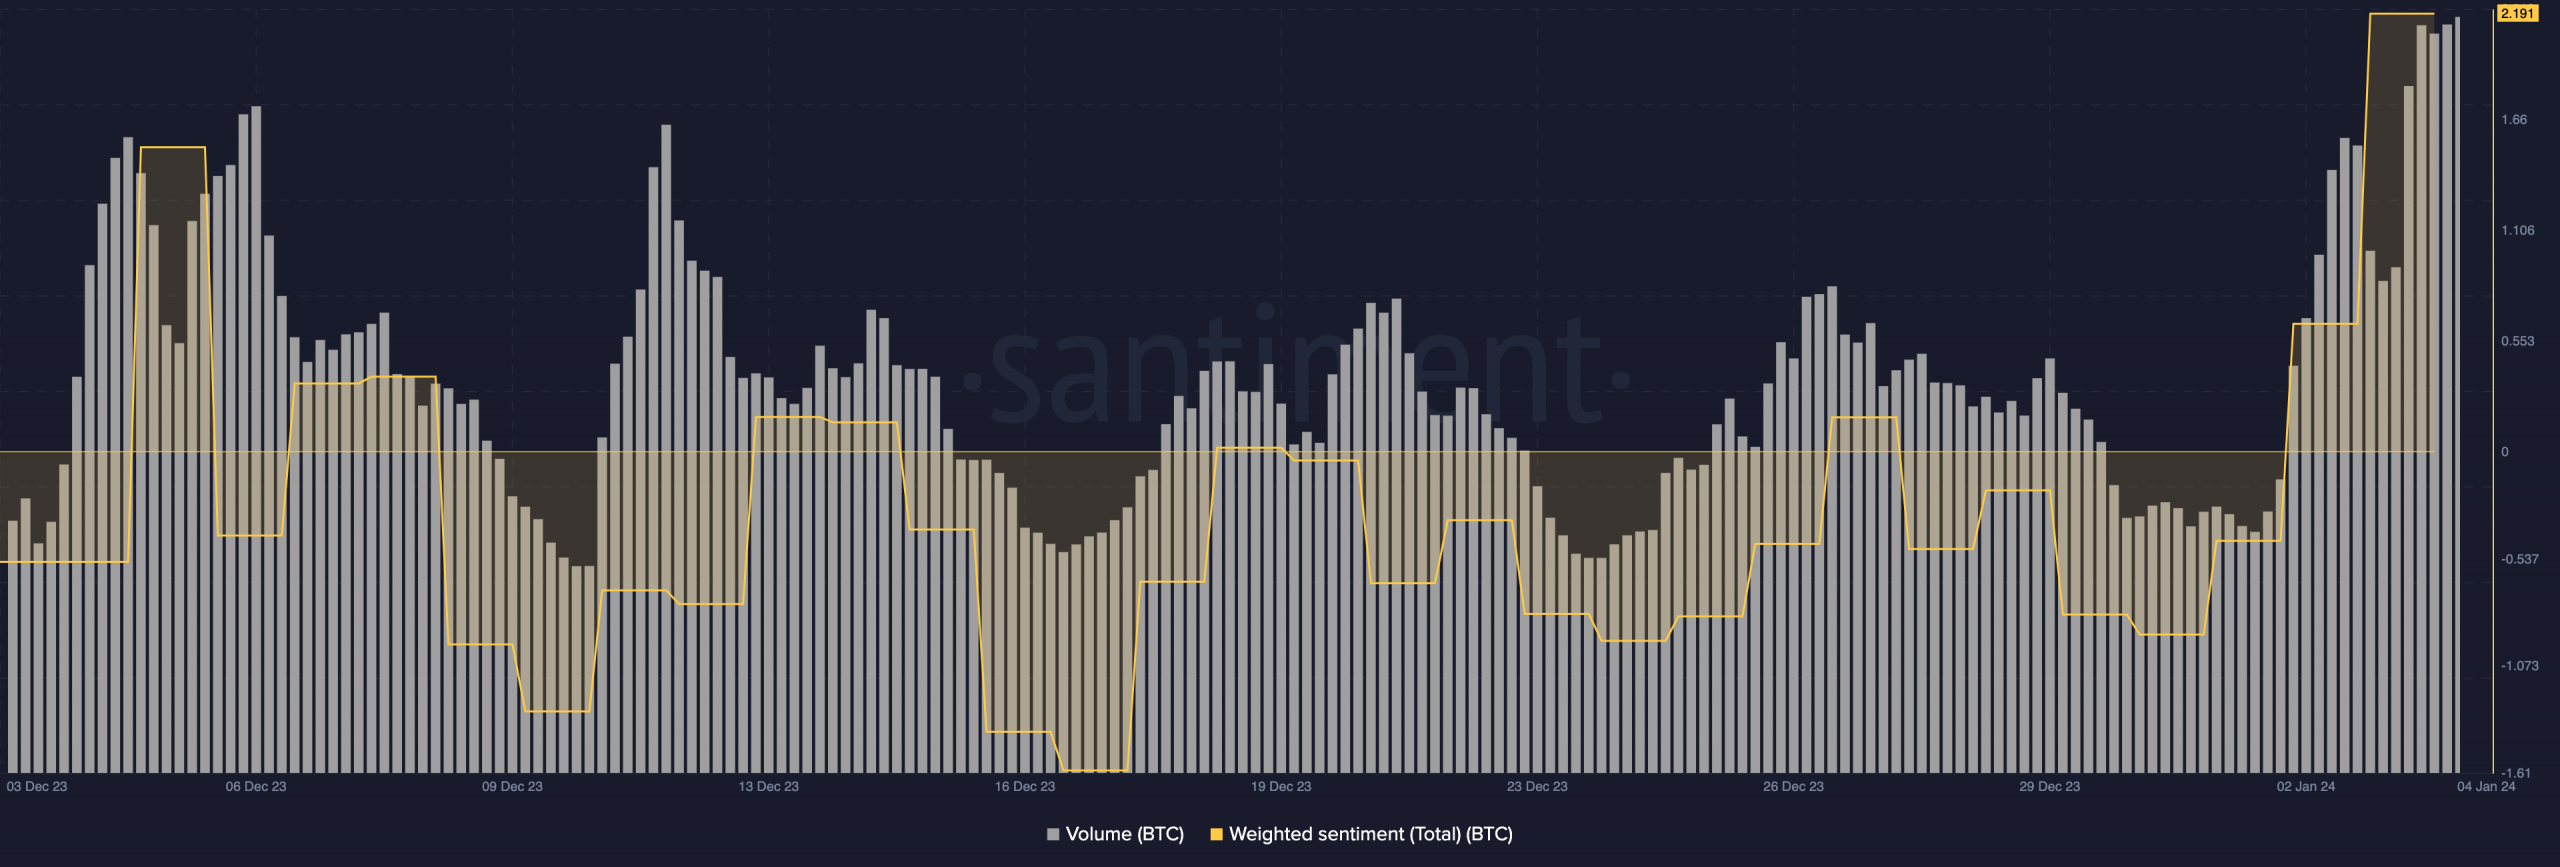 Bitcoin trading volume and weighted sentiment after BTC crashed to $41,000